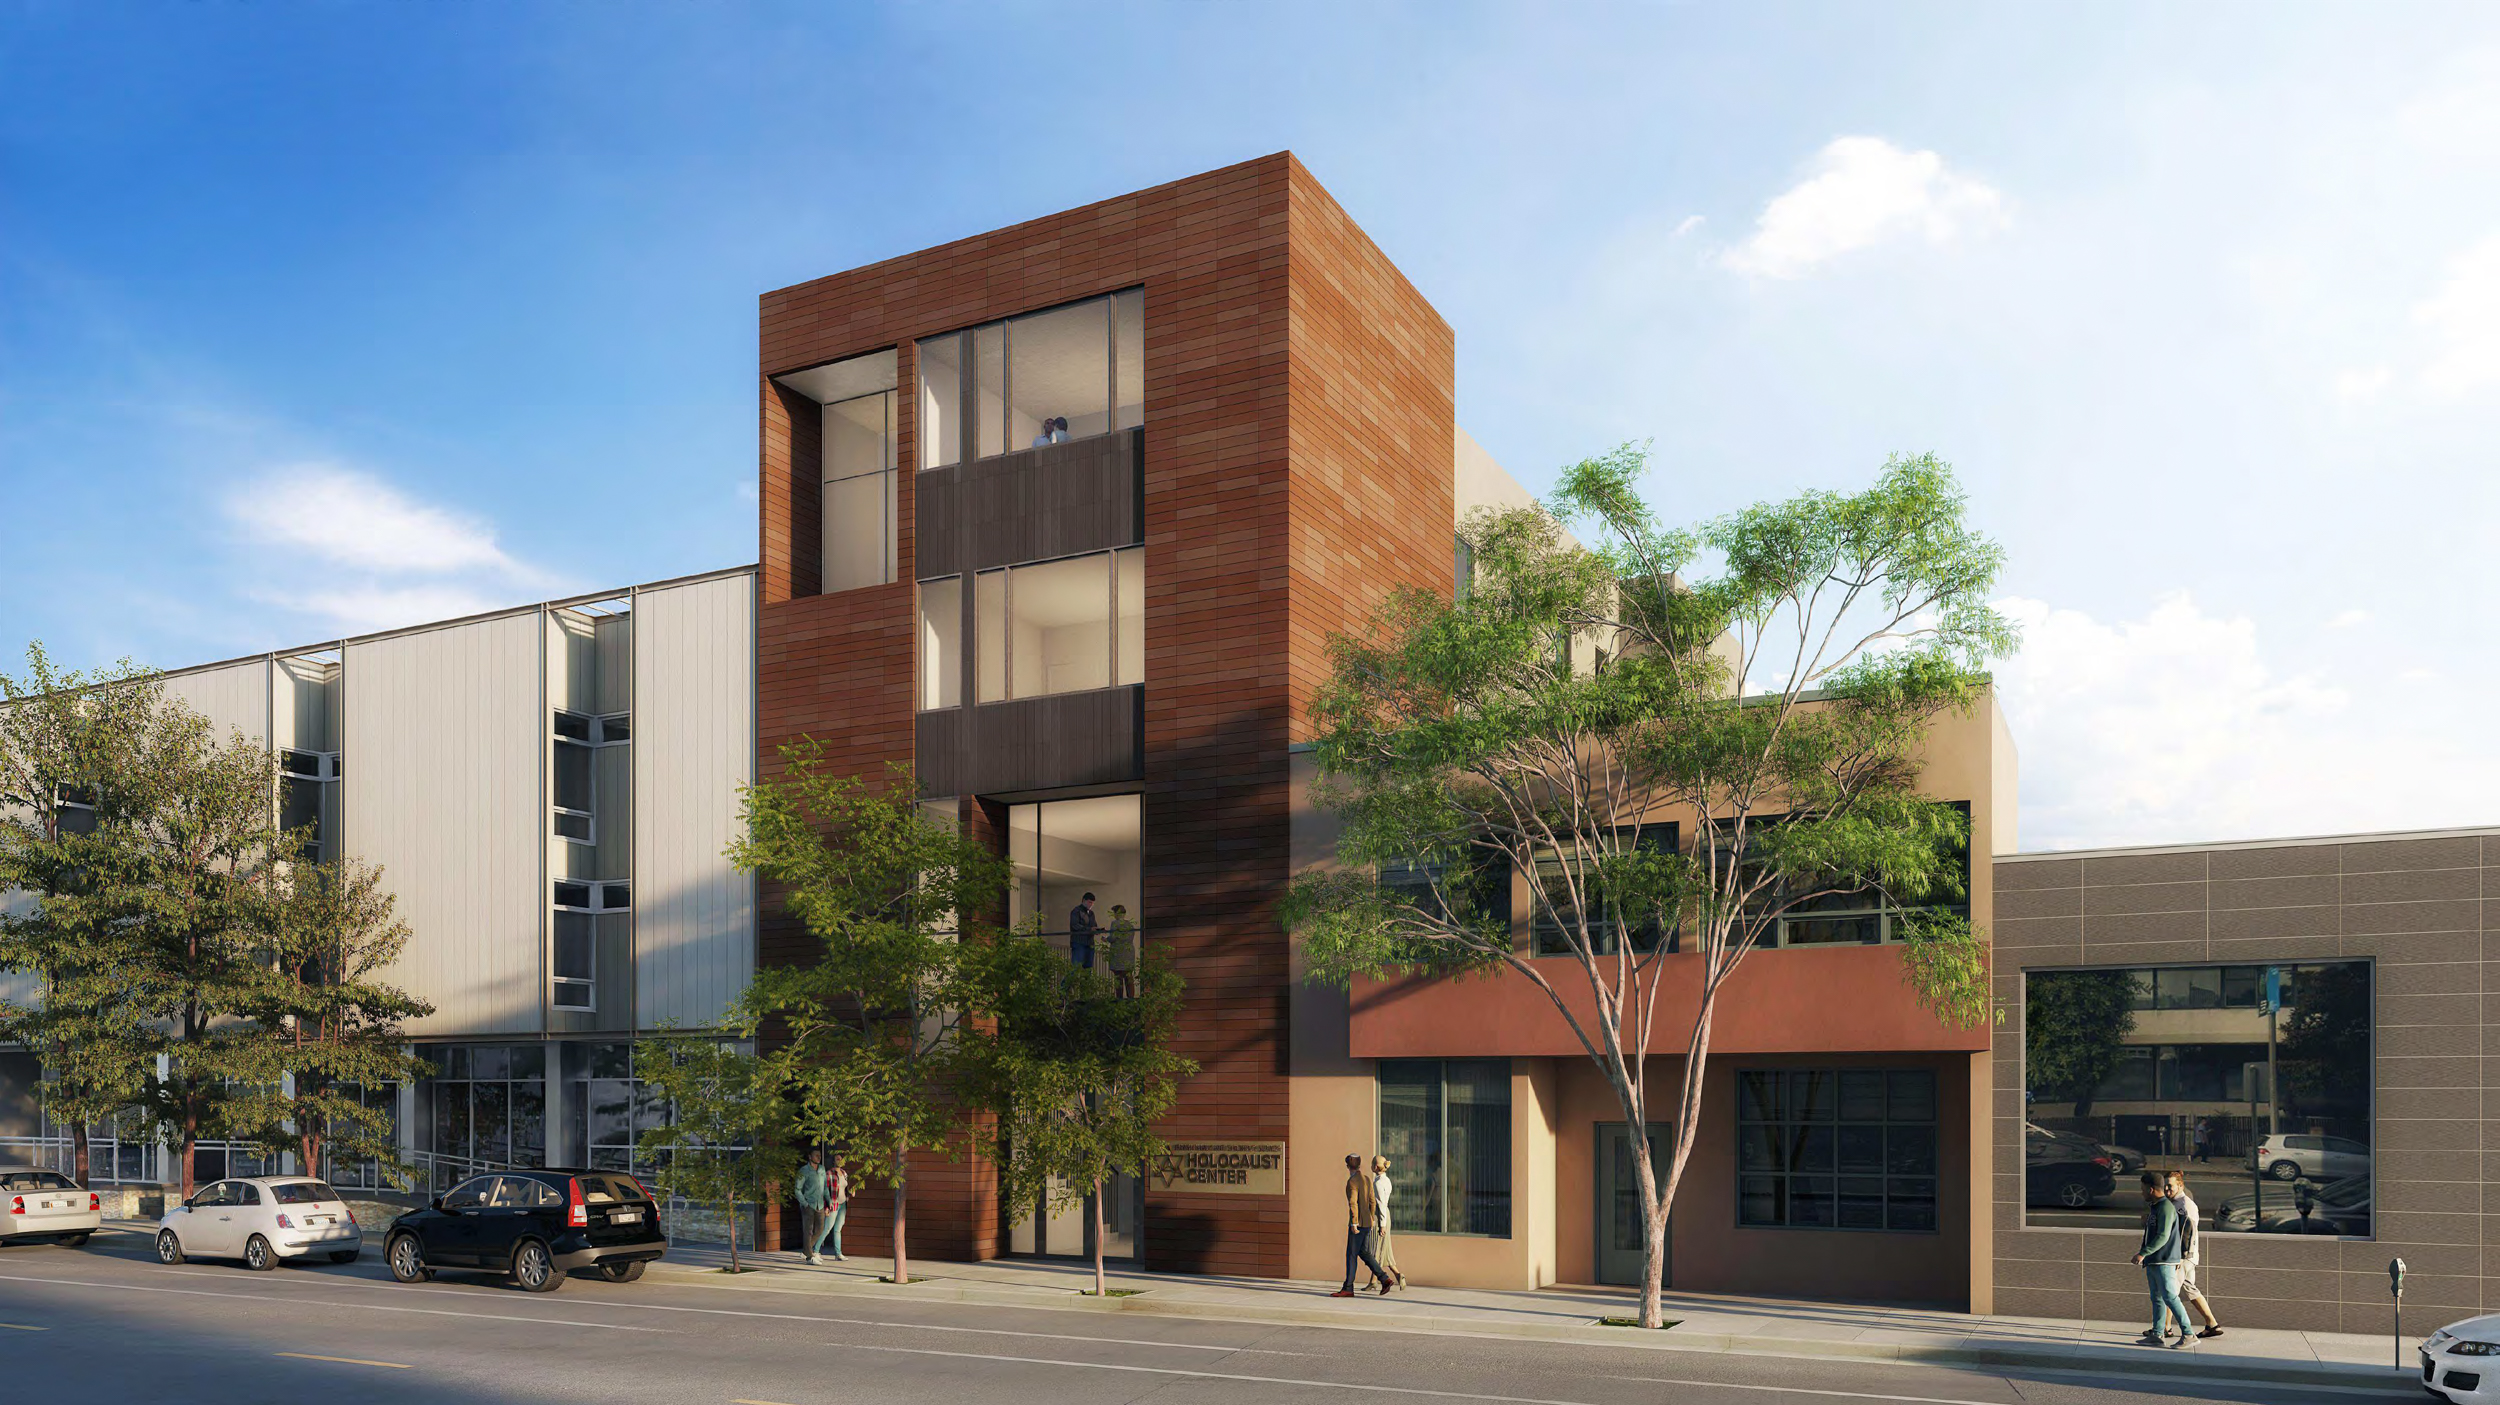 The Holocaust Center for 2245 Post Street, rendering by KPAD